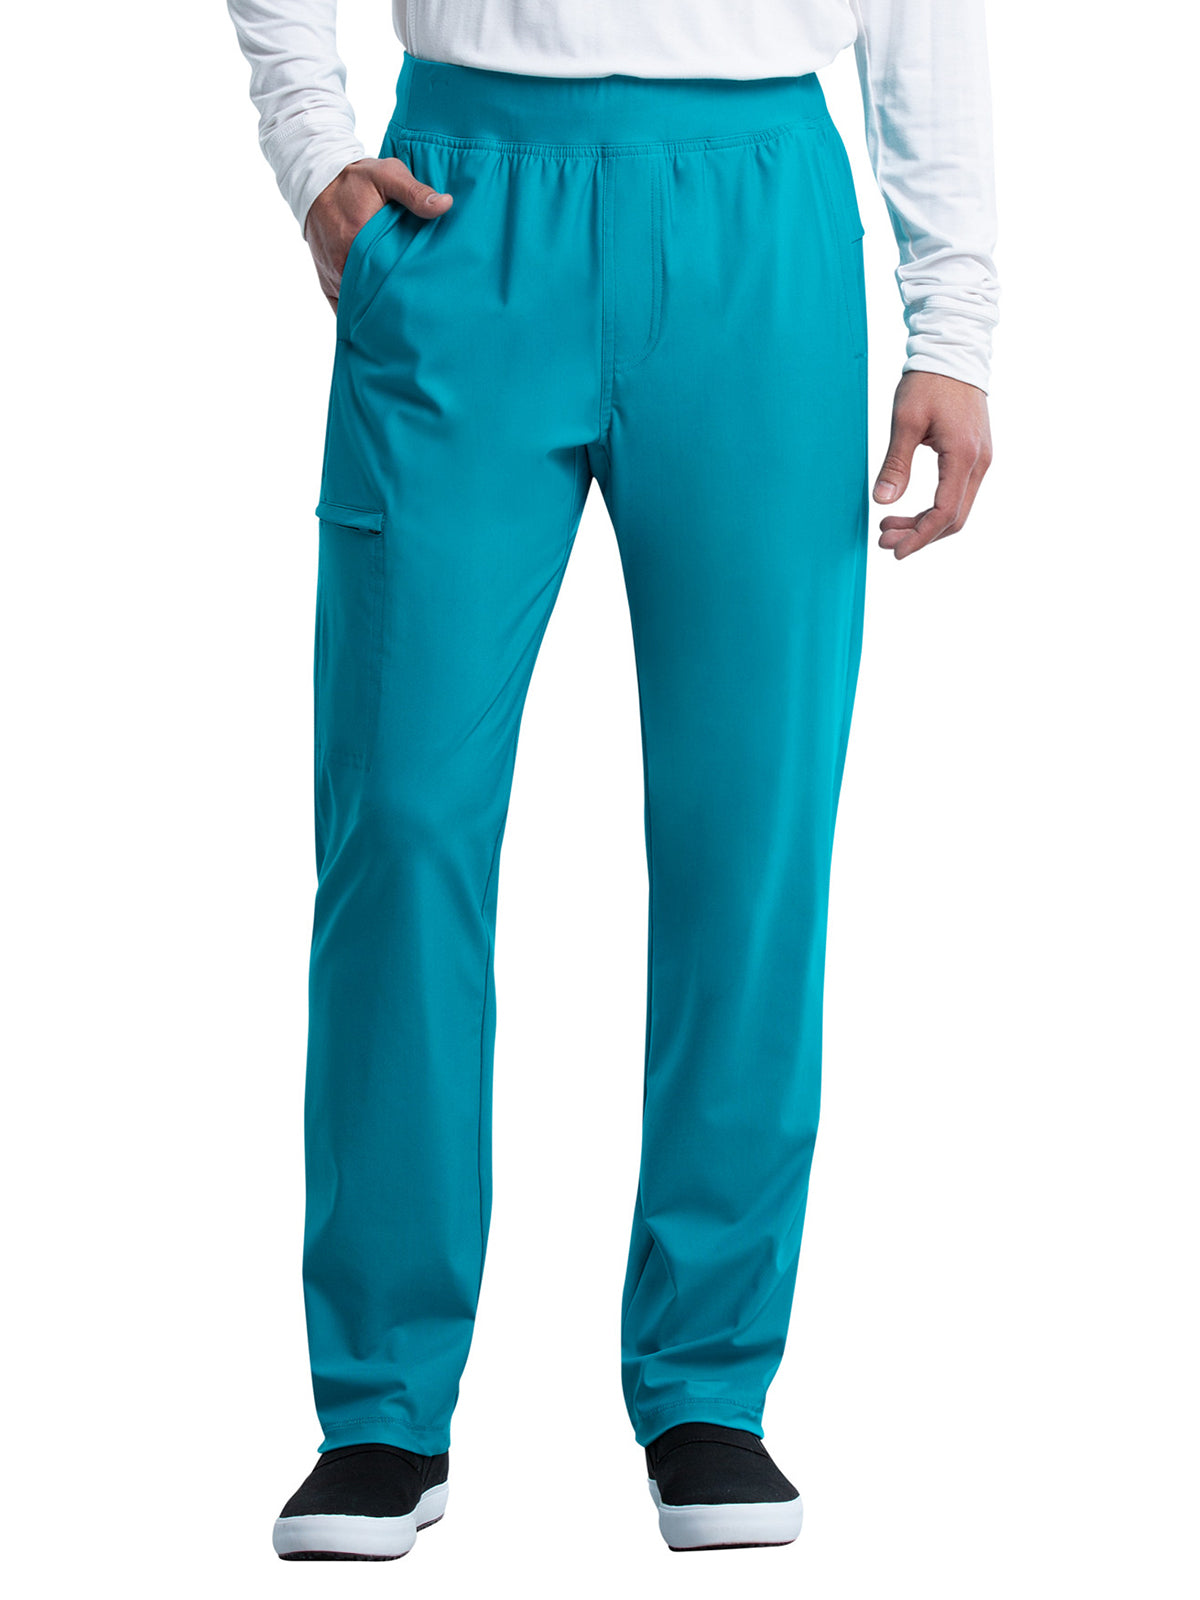 Men's Faux Front Fly Tapered Leg Pull-on Scrub Pant - CK185 - Teal Blue